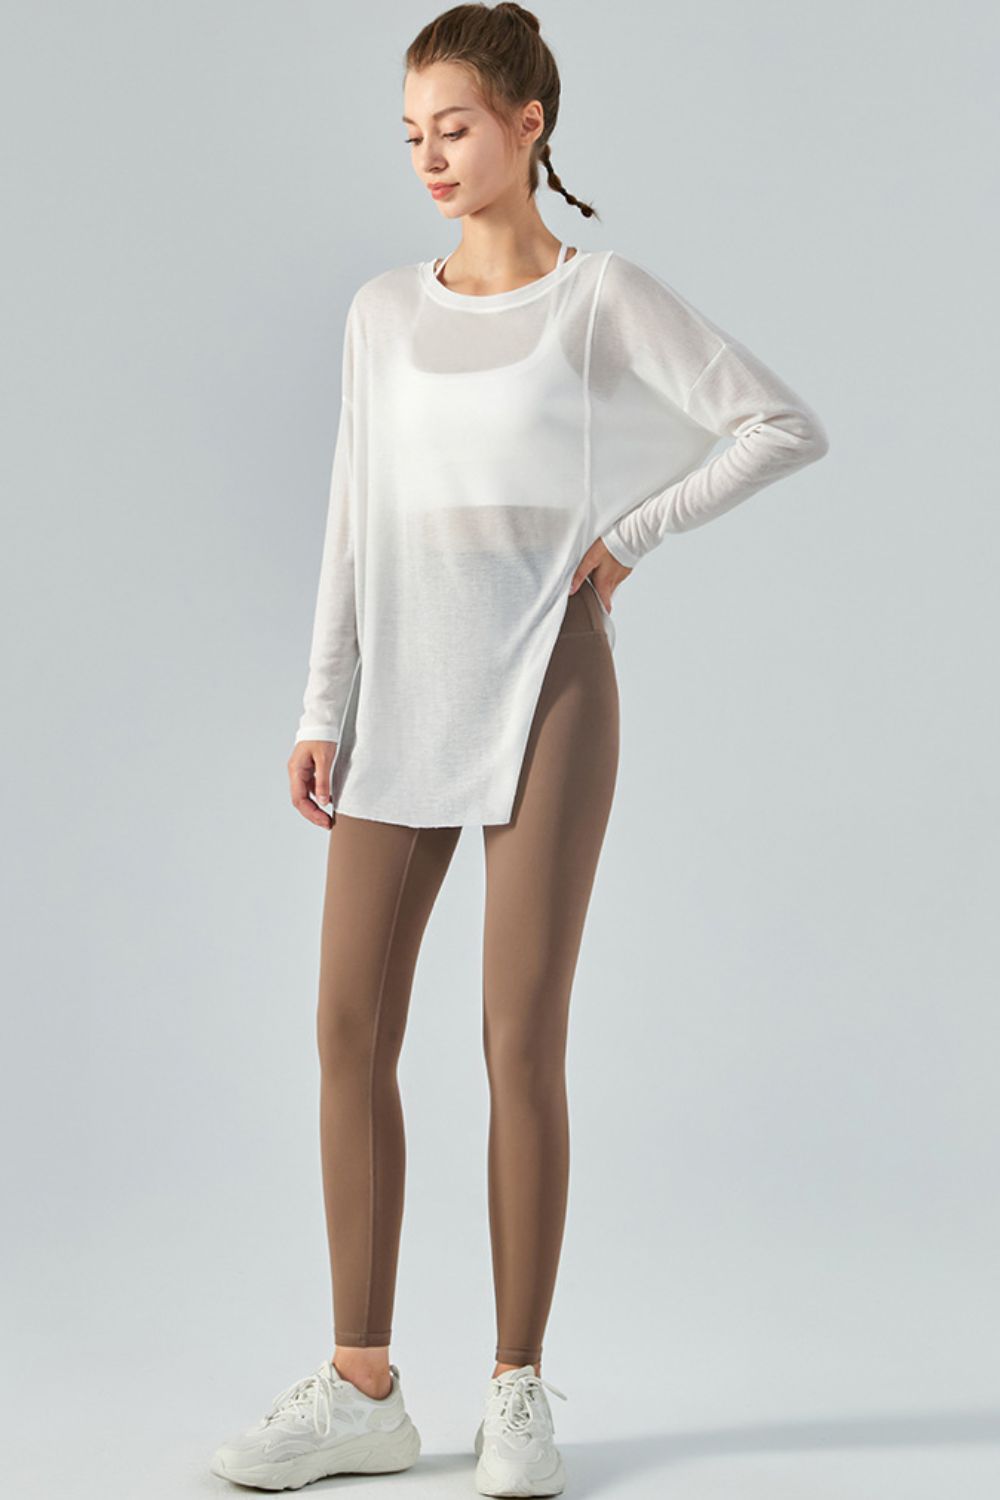 Light Gray Dedication Breeds Results Round Neck Slit Sheer Tunic Sports Top Shirts & Tops